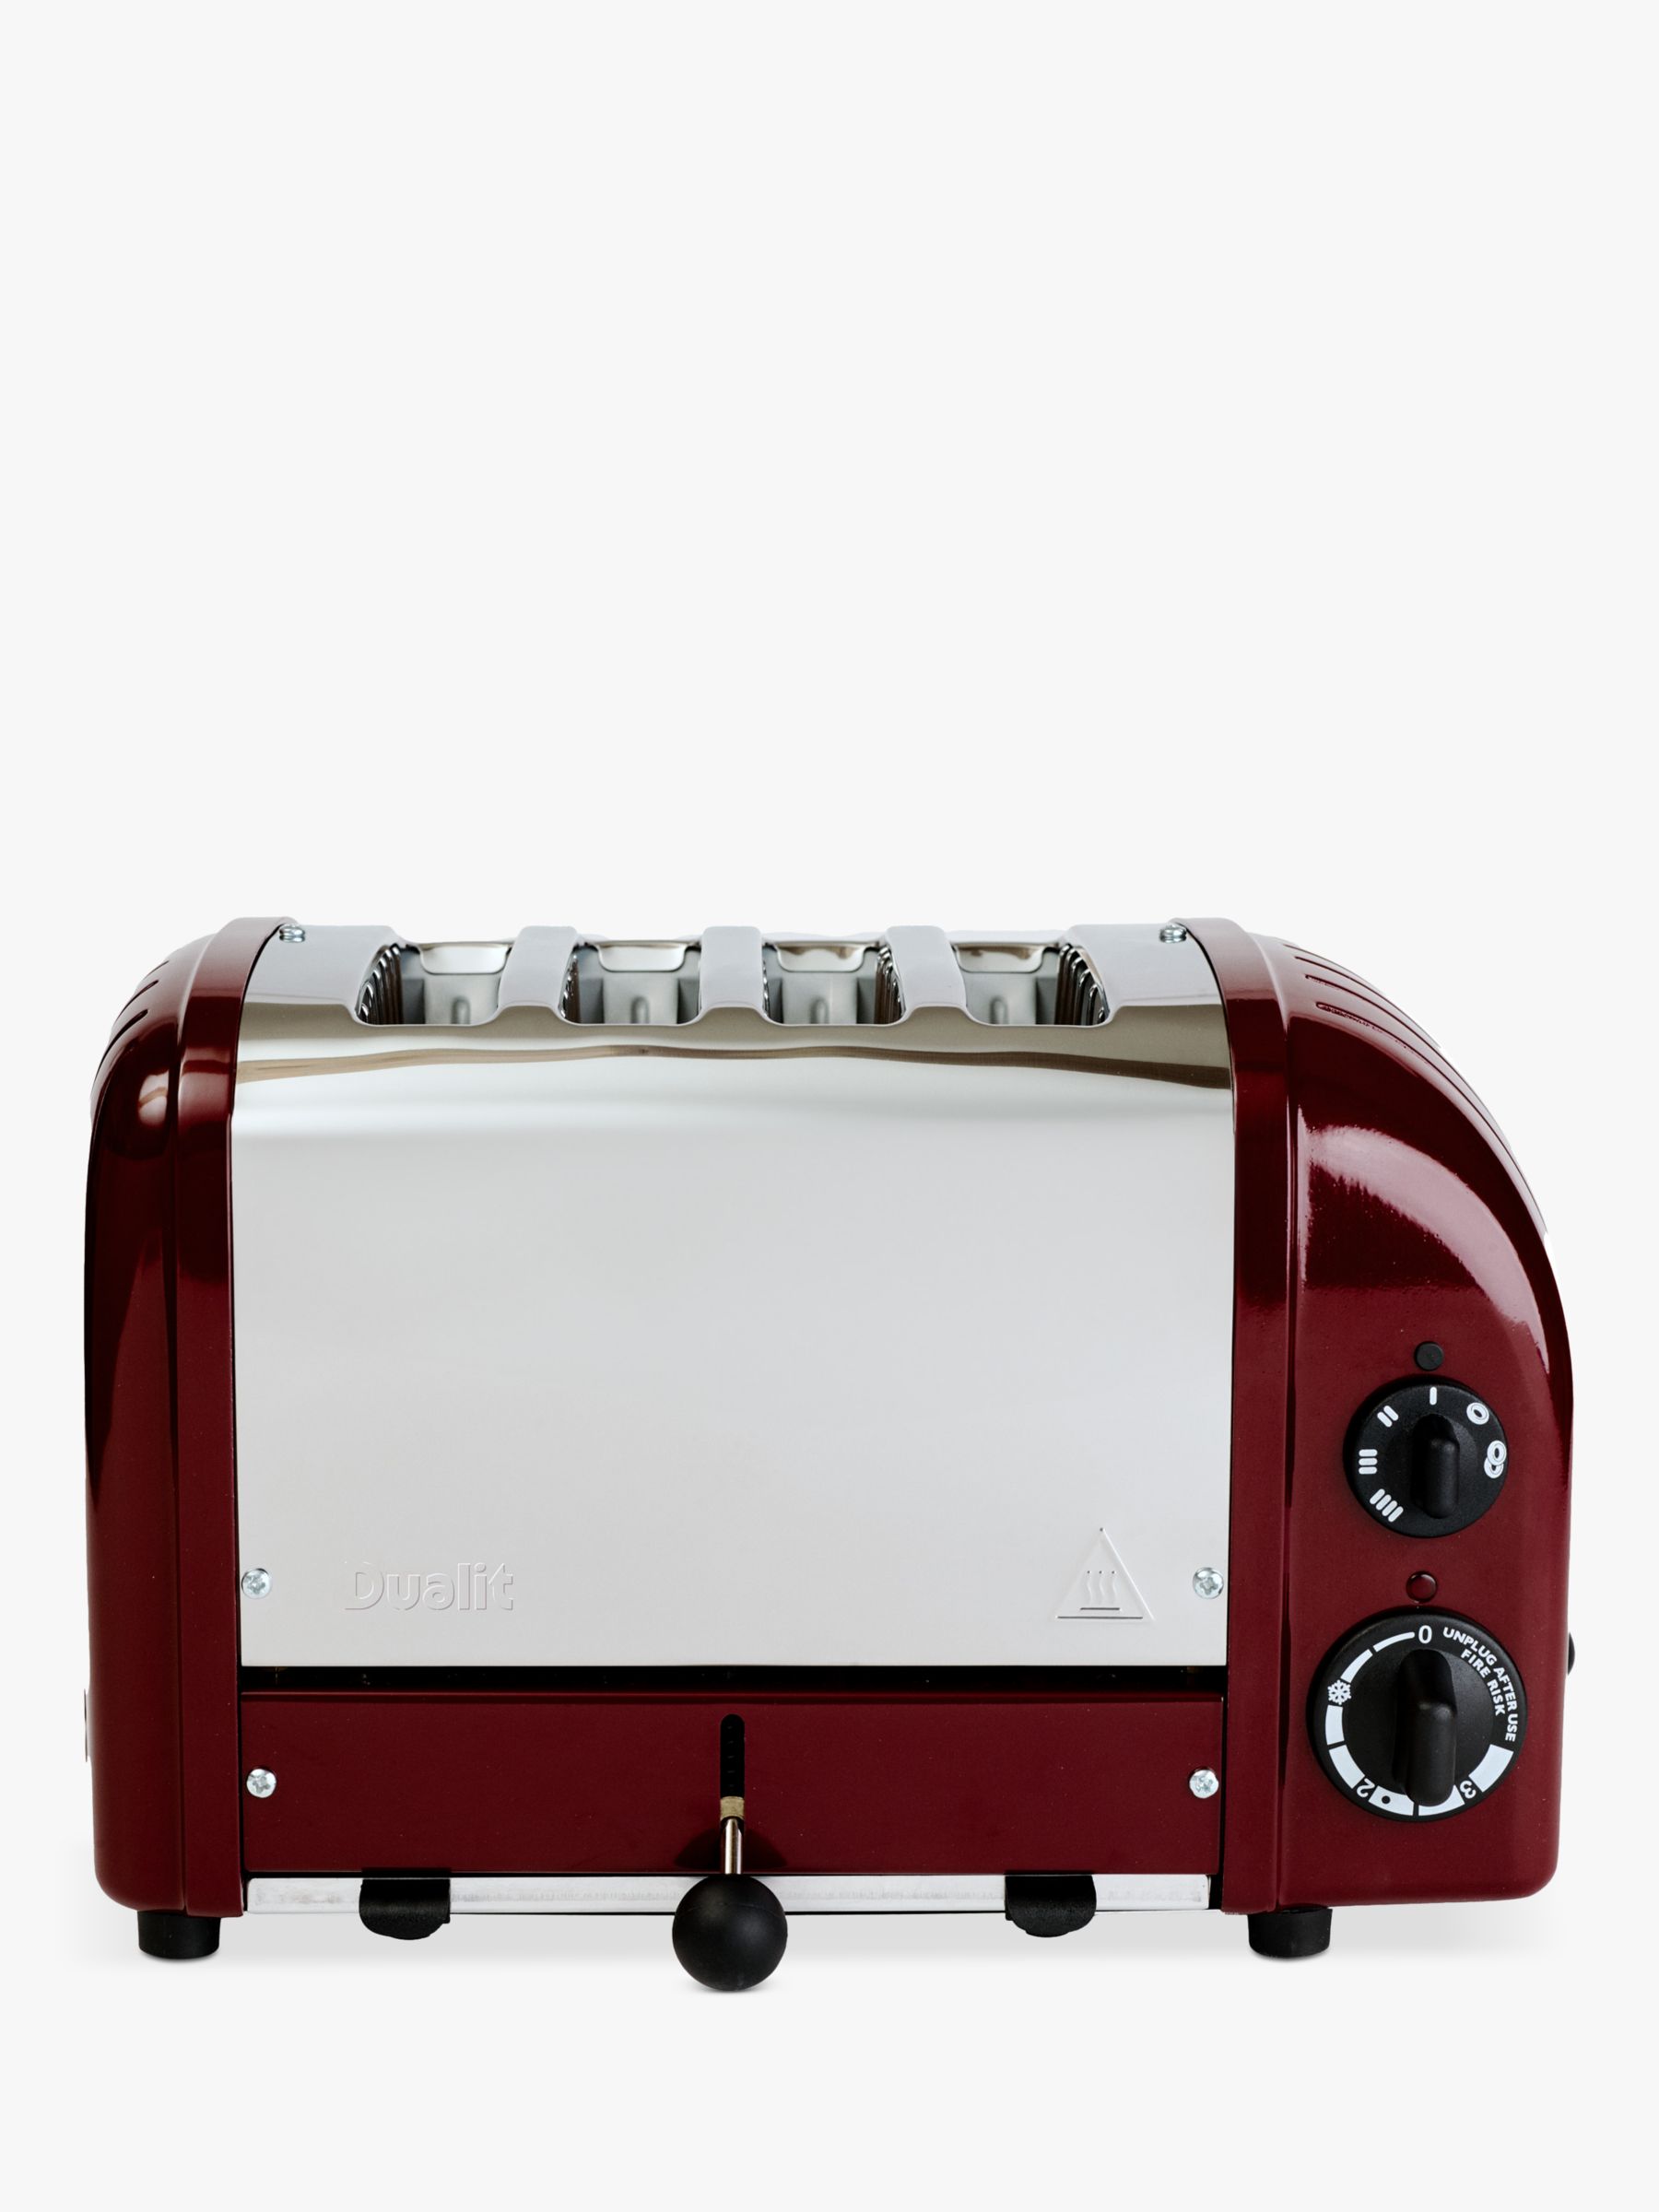 Dualit Lite 4-Slice Toaster with Warming Rack, Metallic Red Review